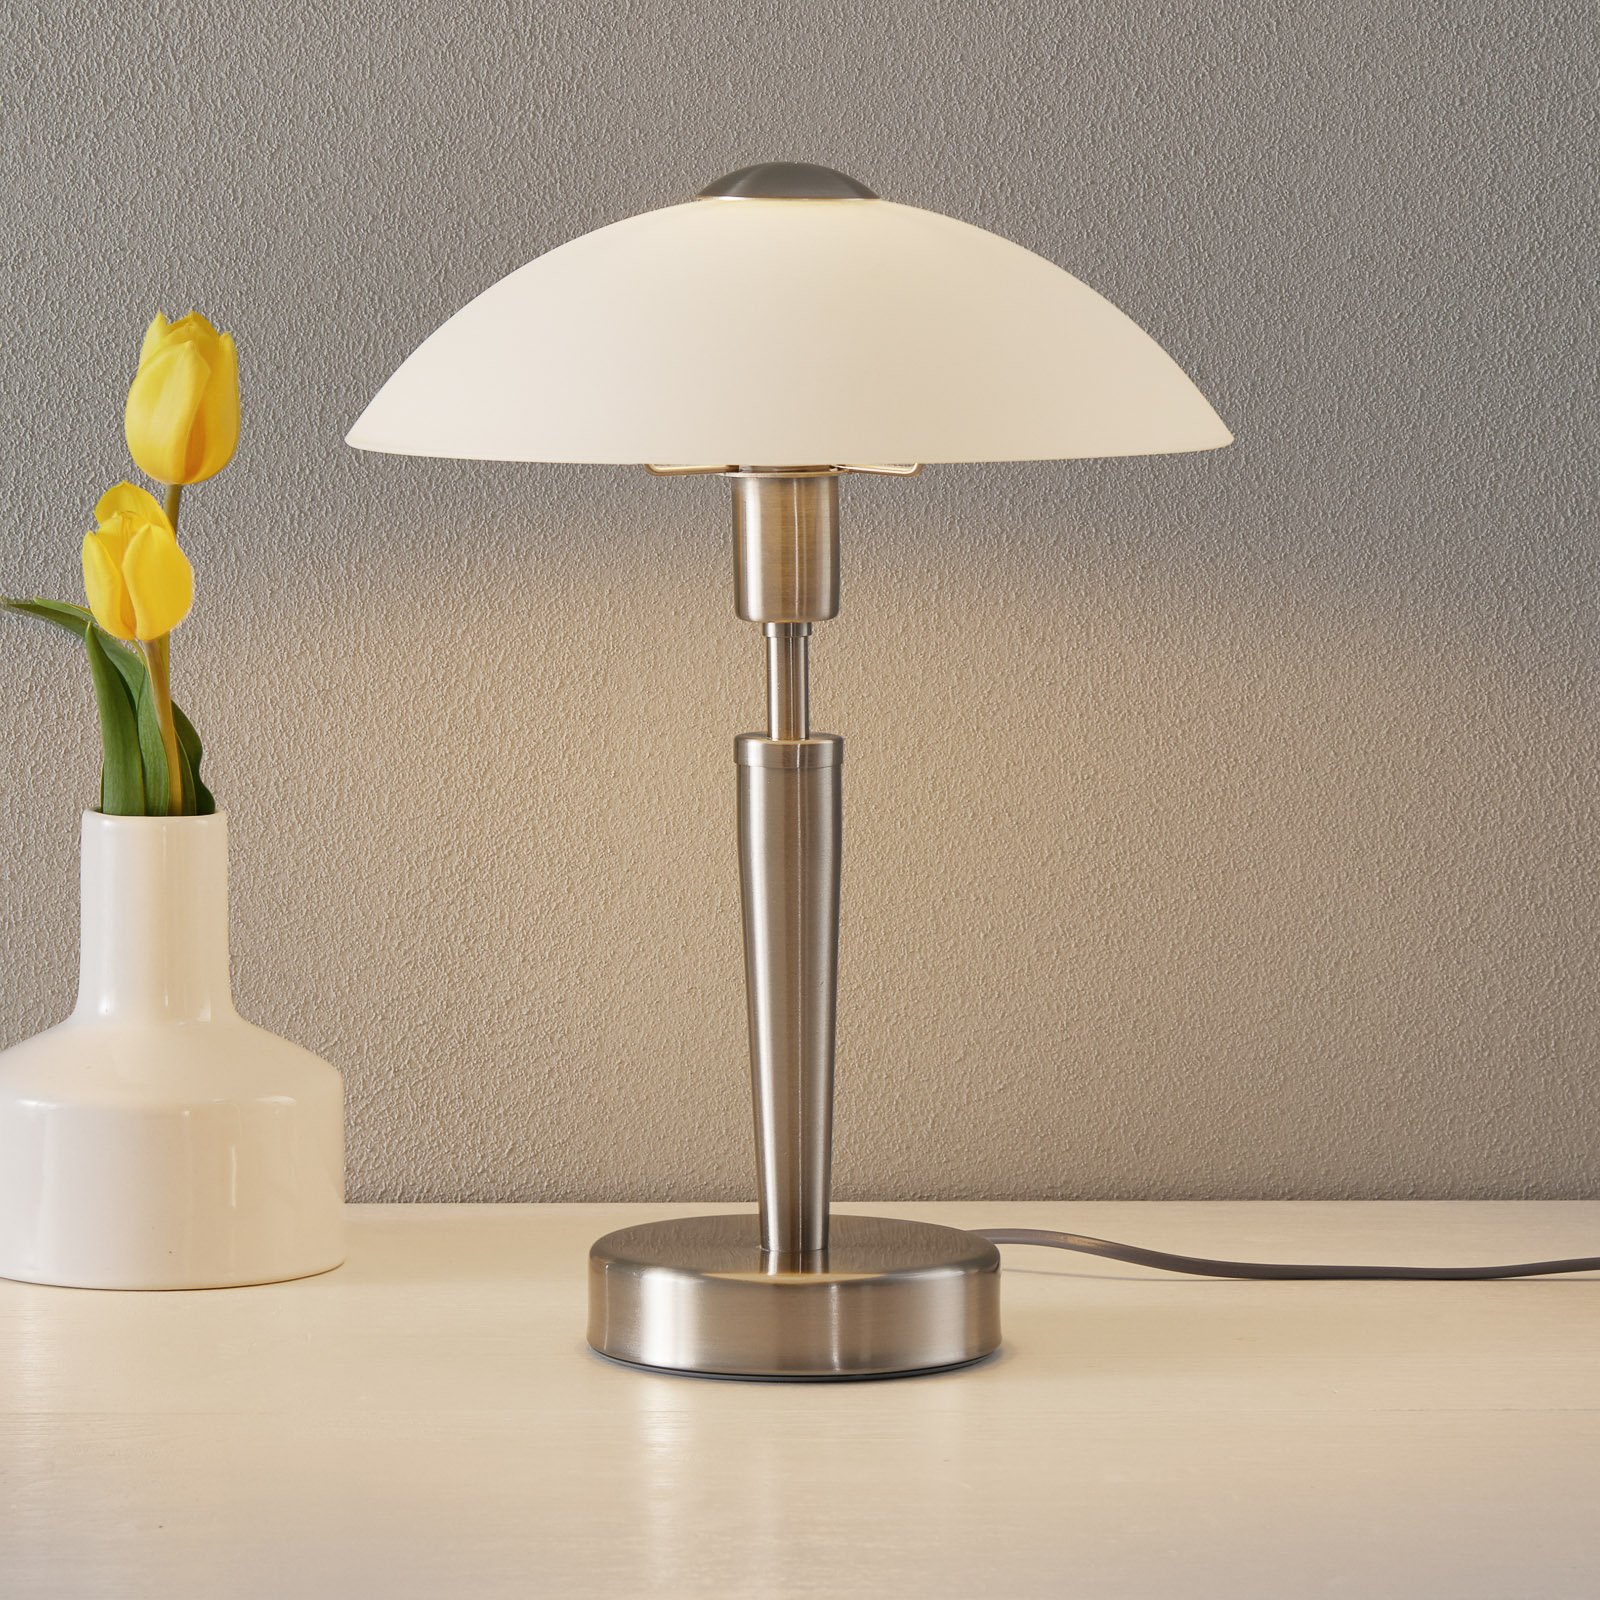 Solo 1 bedside table lamp, nickel, white